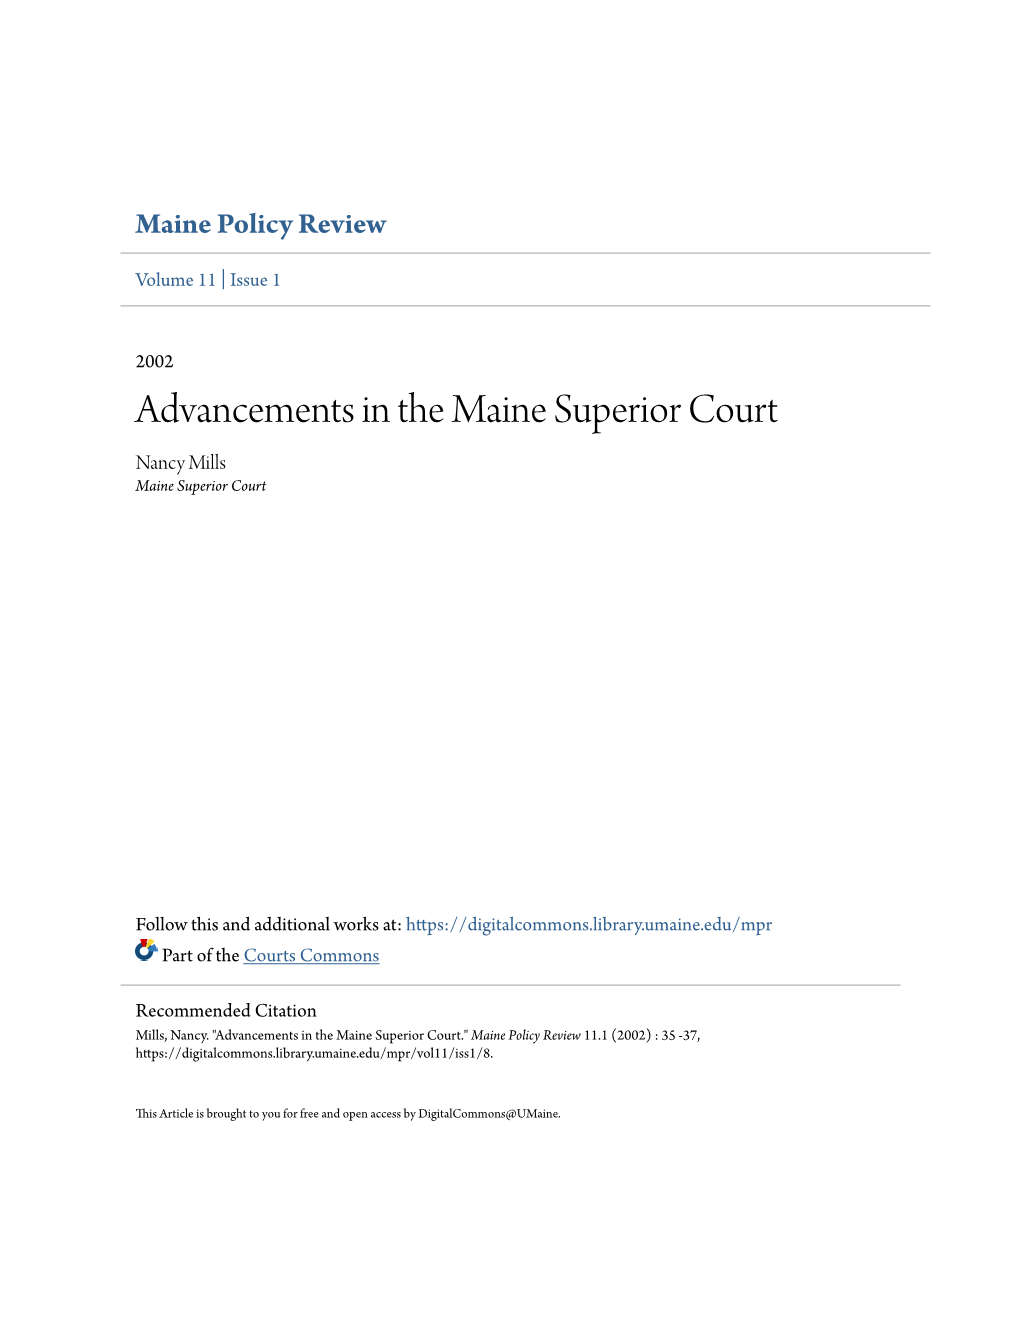 Advancements in the Maine Superior Court Nancy Mills Maine Superior Court